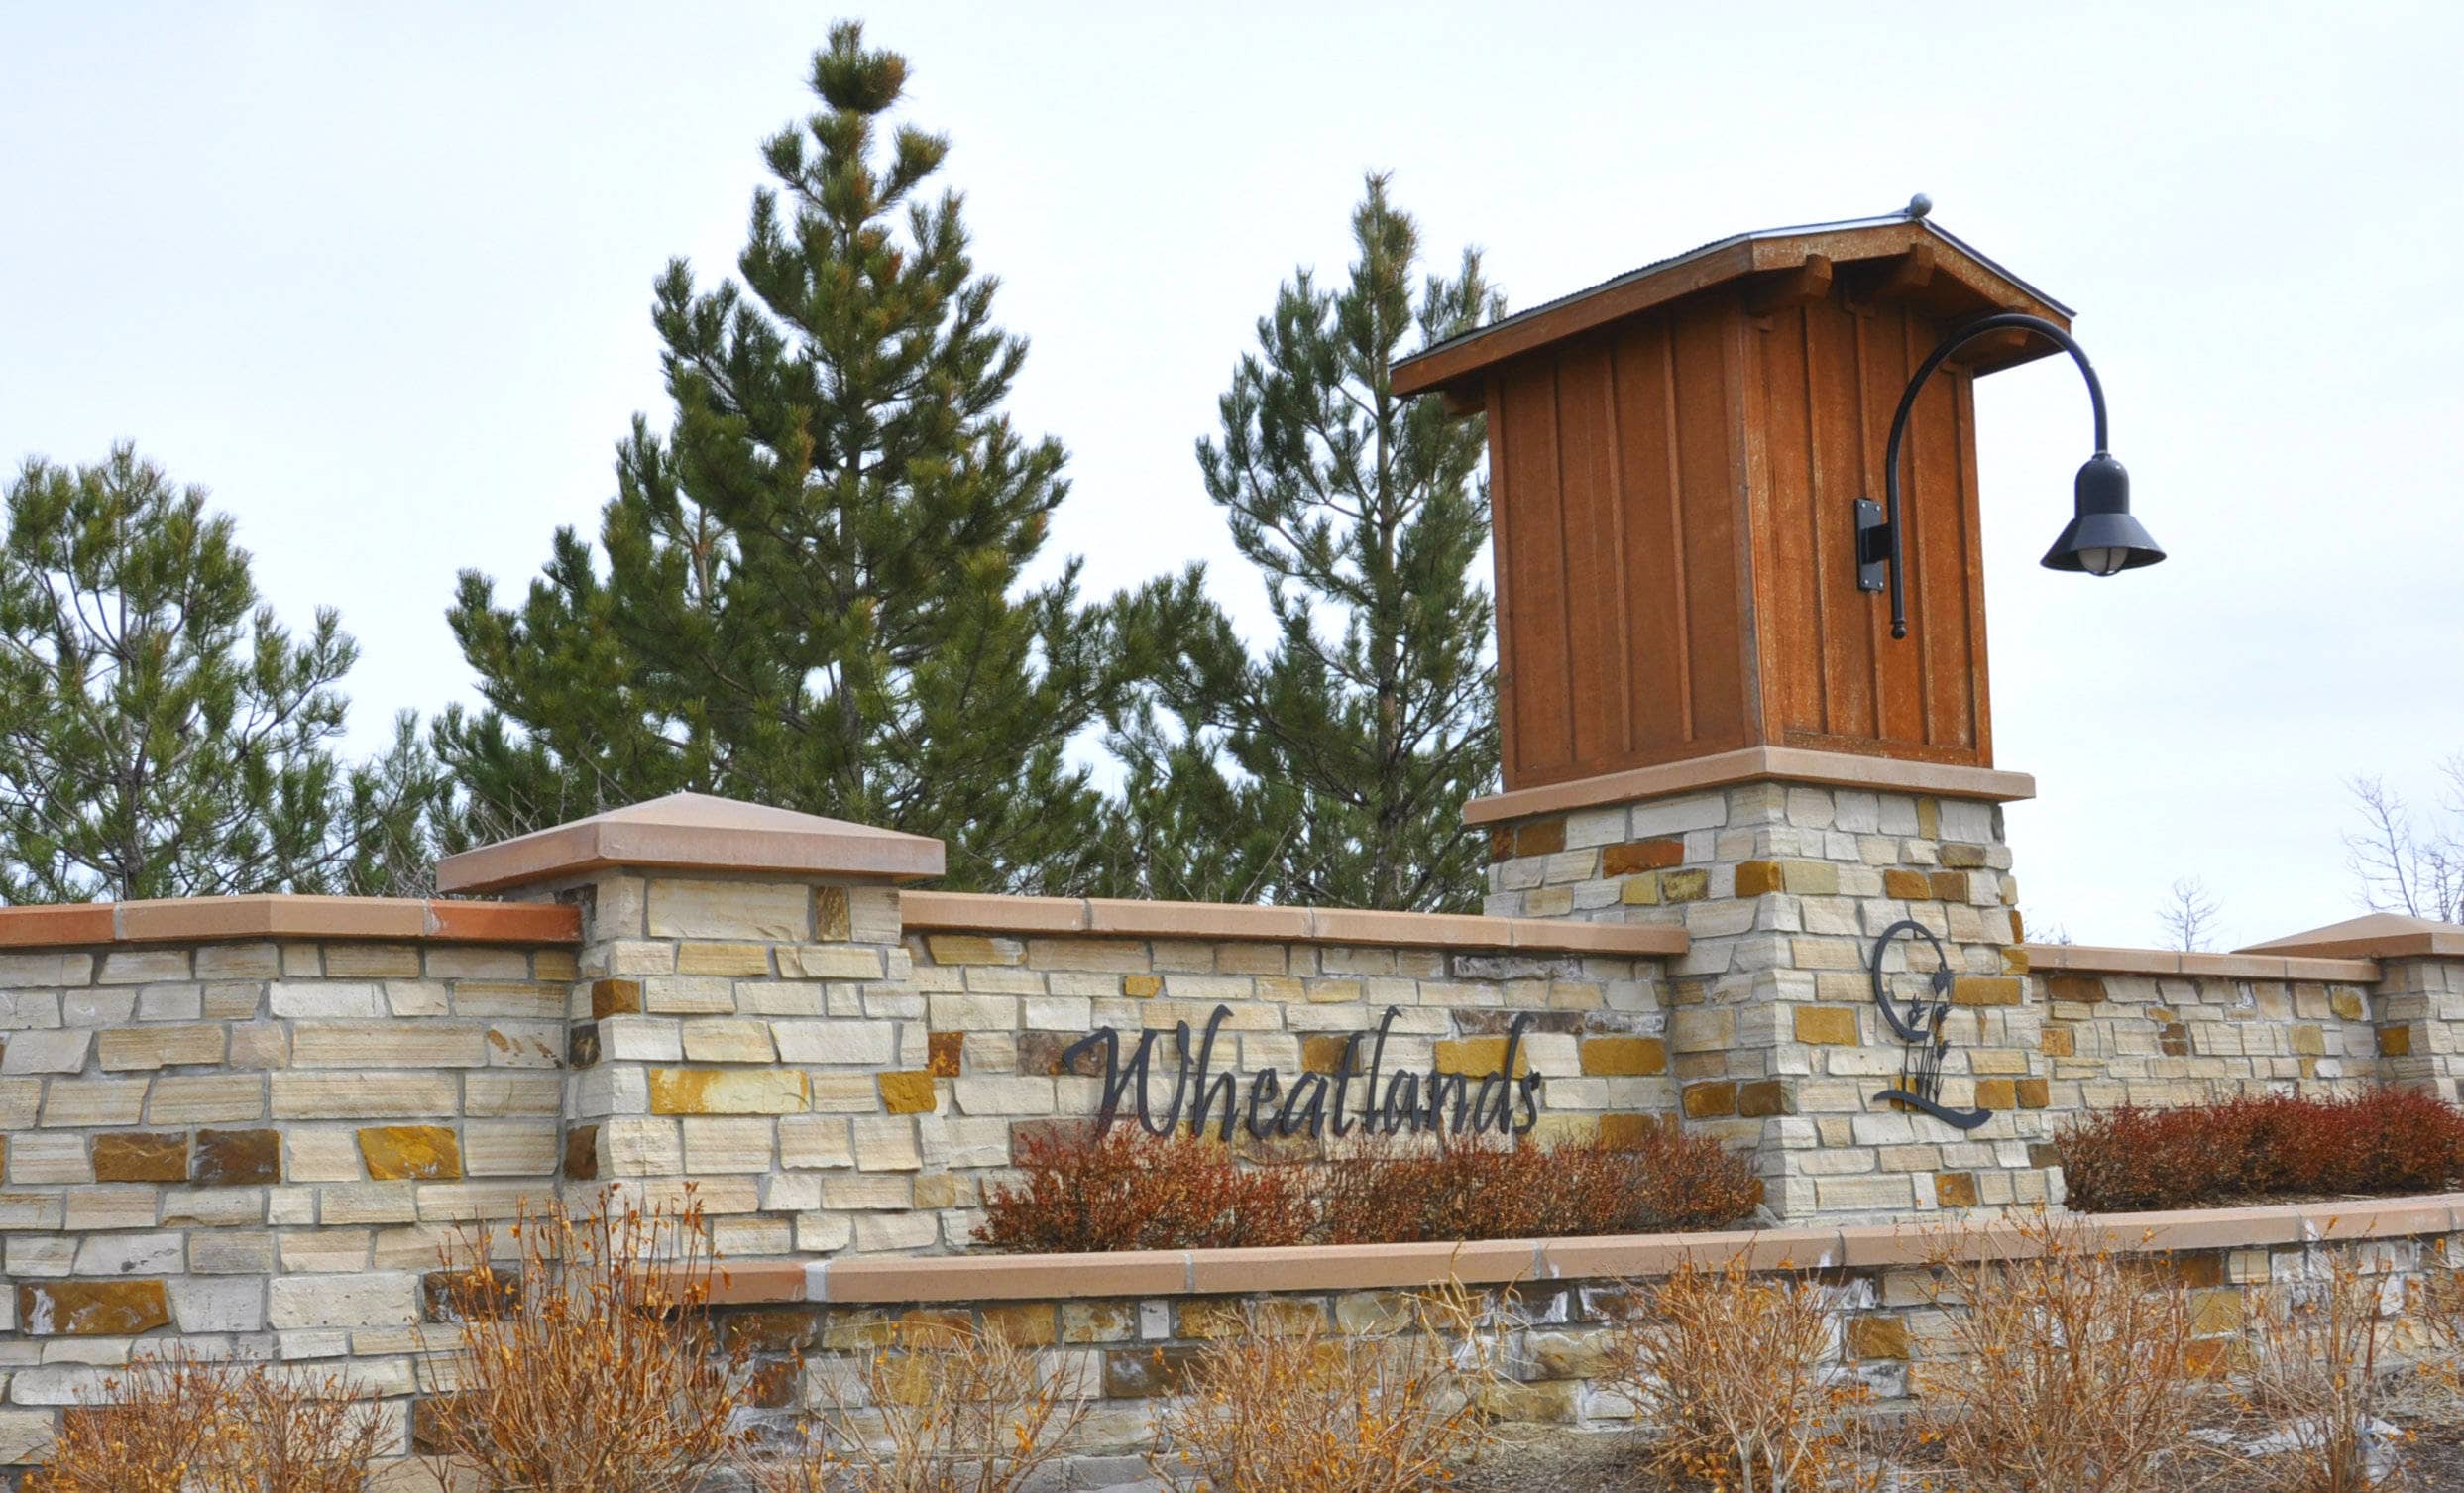 Wheatlands Homes for Sale